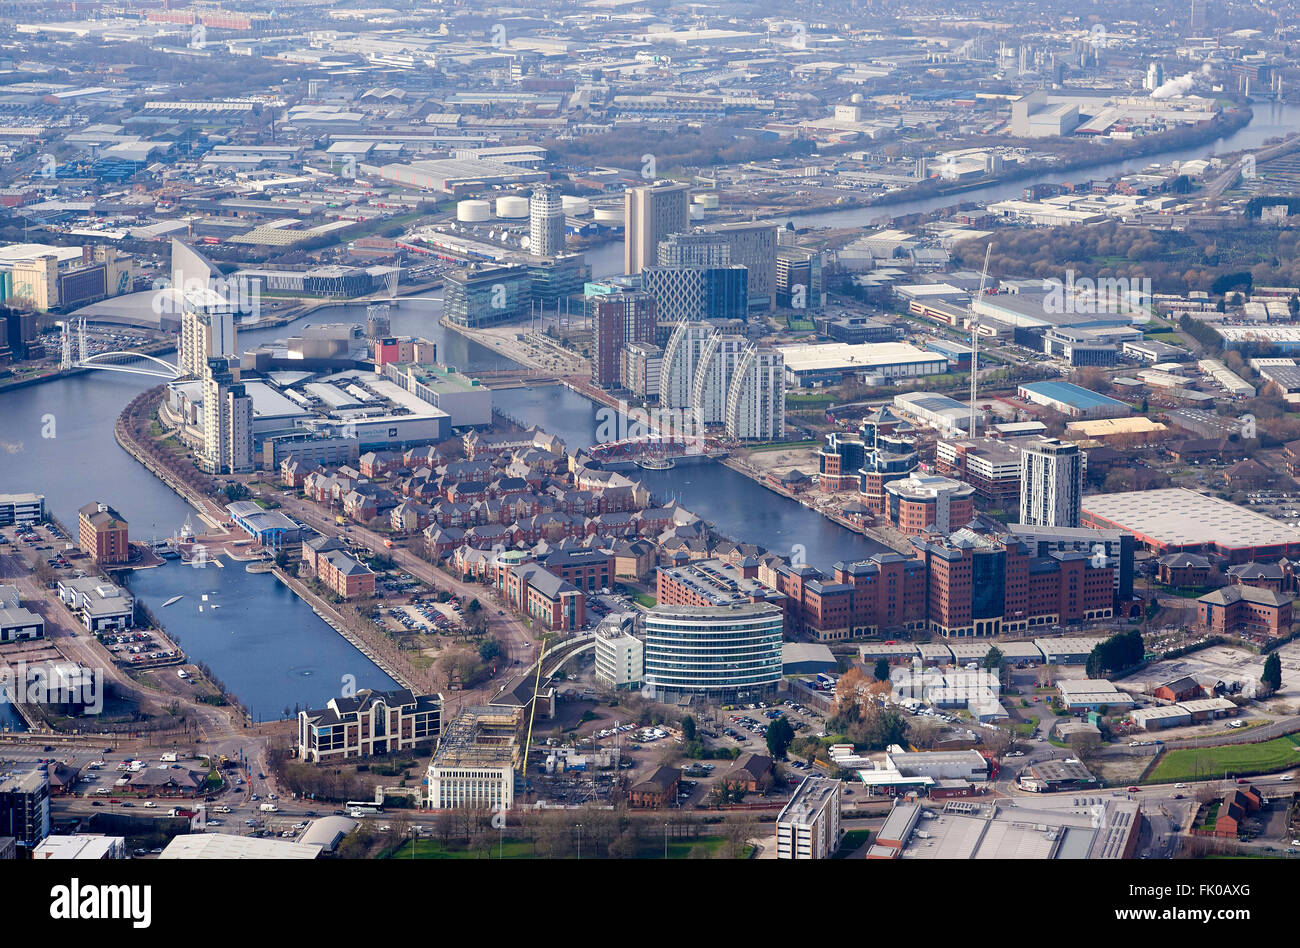 Salford Quays, Manchester, NW England, UK Stock Photo: 97738888 - Alamy